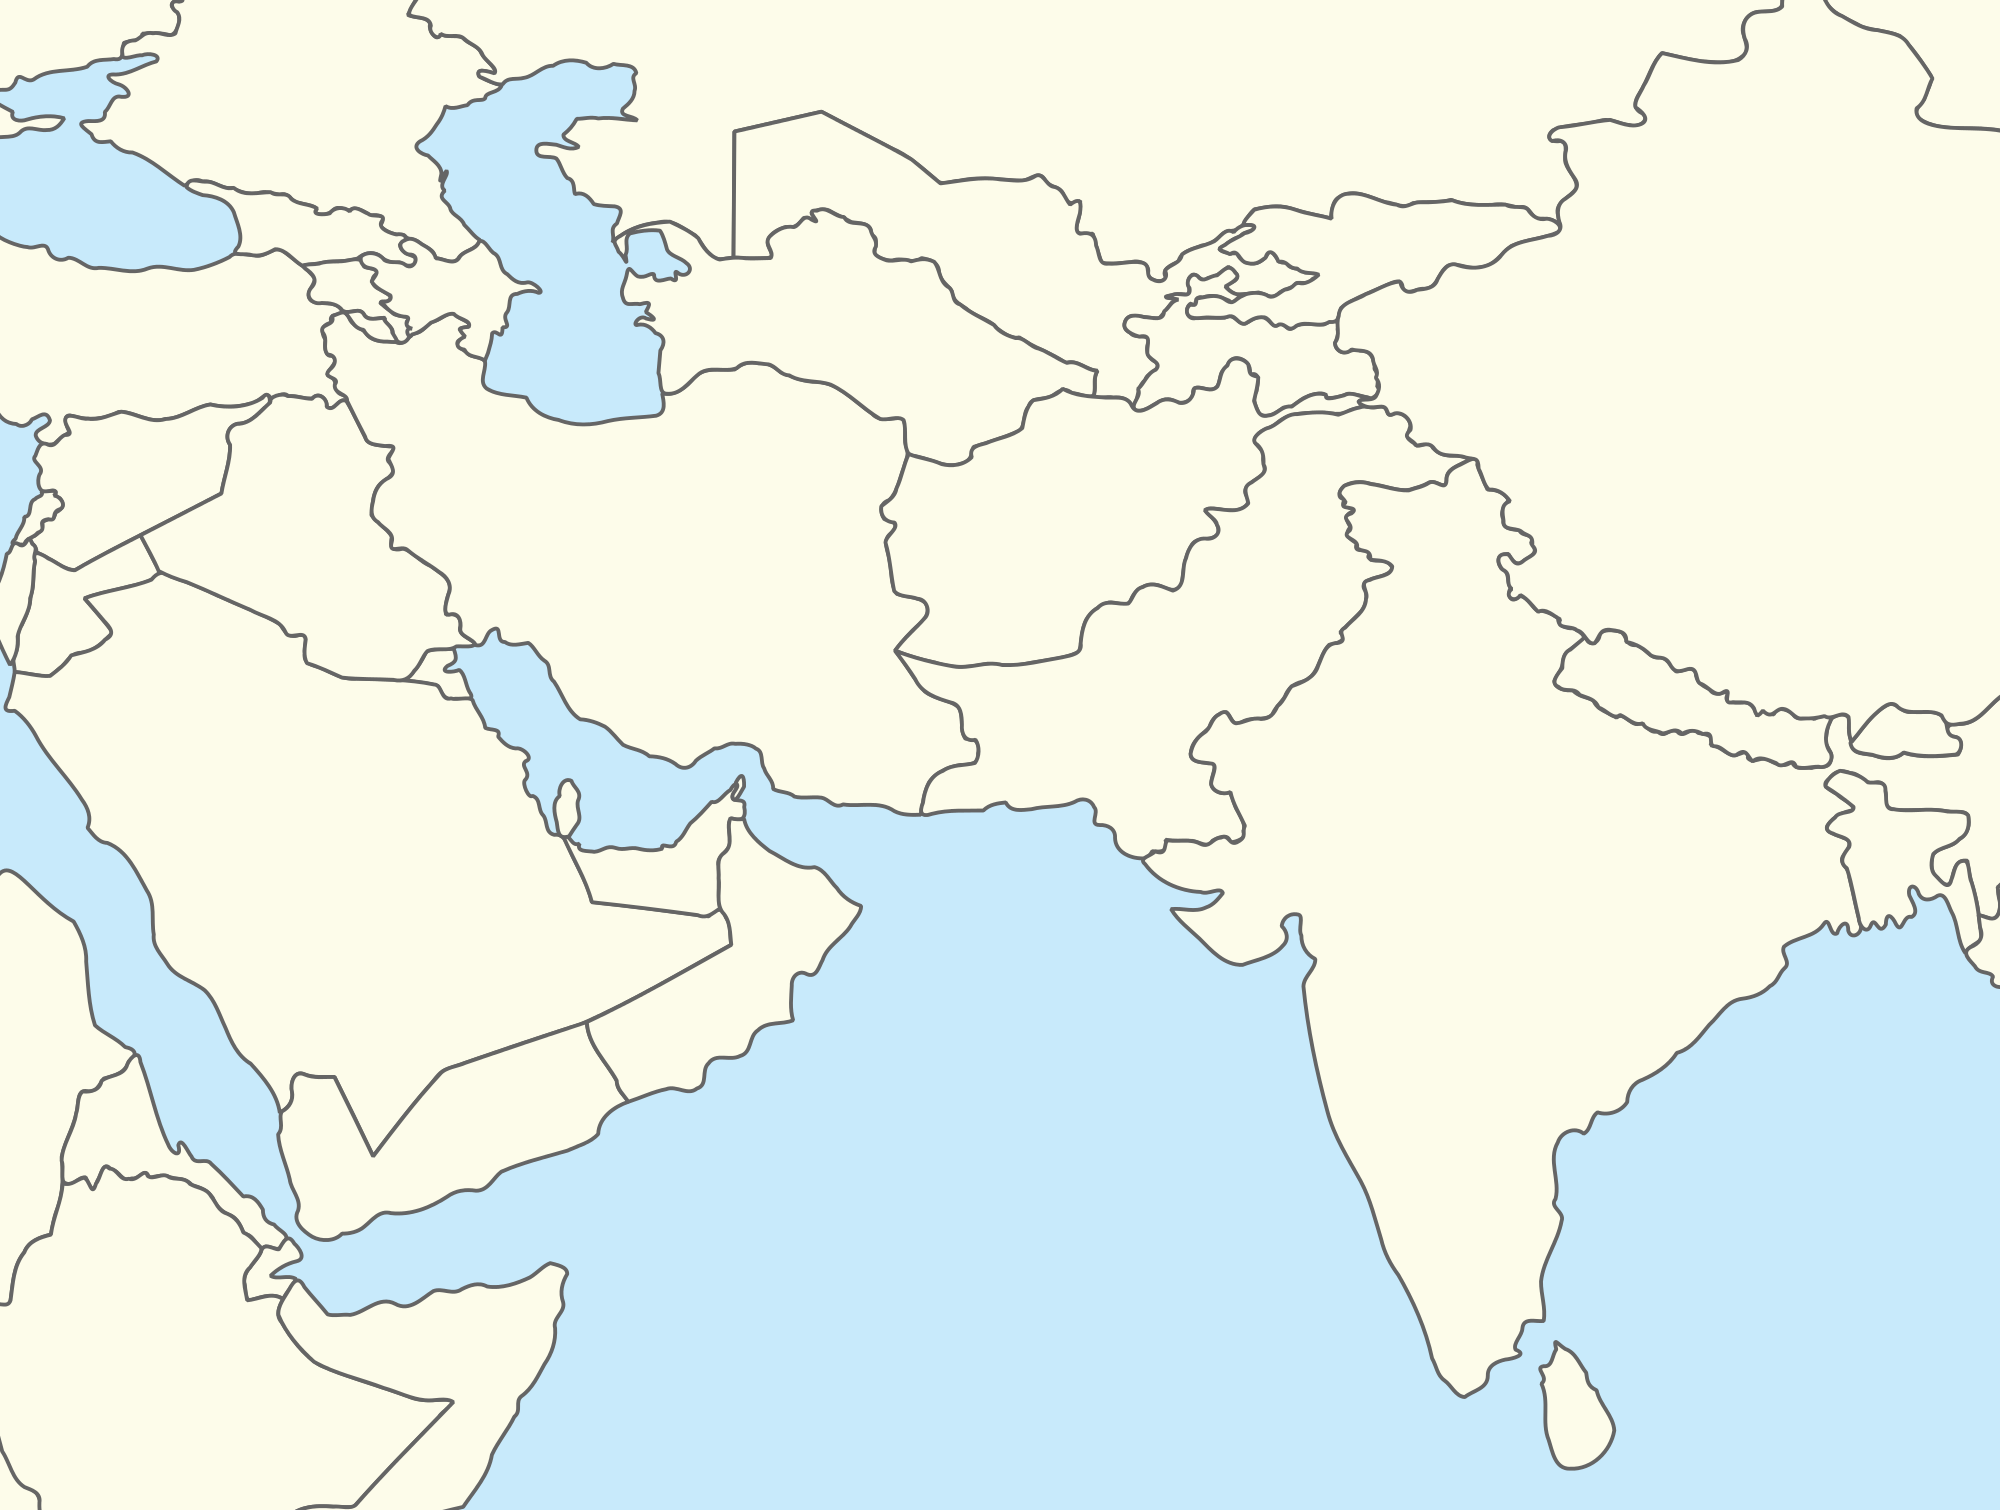  Blank Map of West Asia Physical